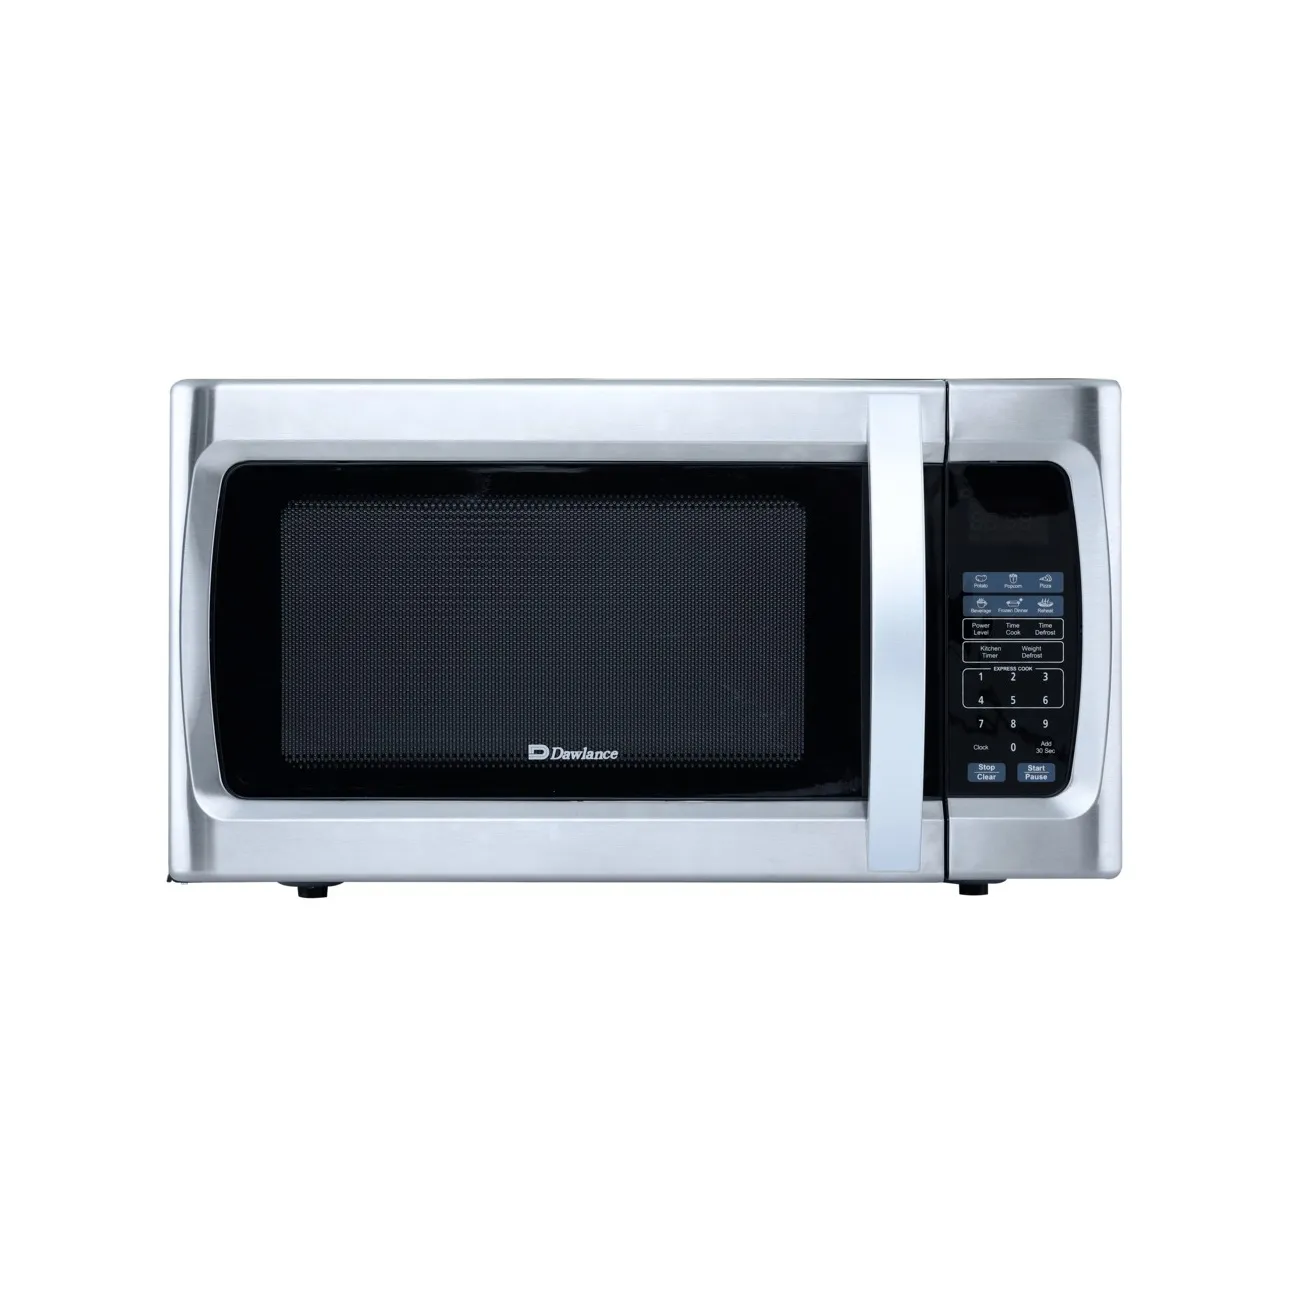 DW 132 S Heating Microwave Oven